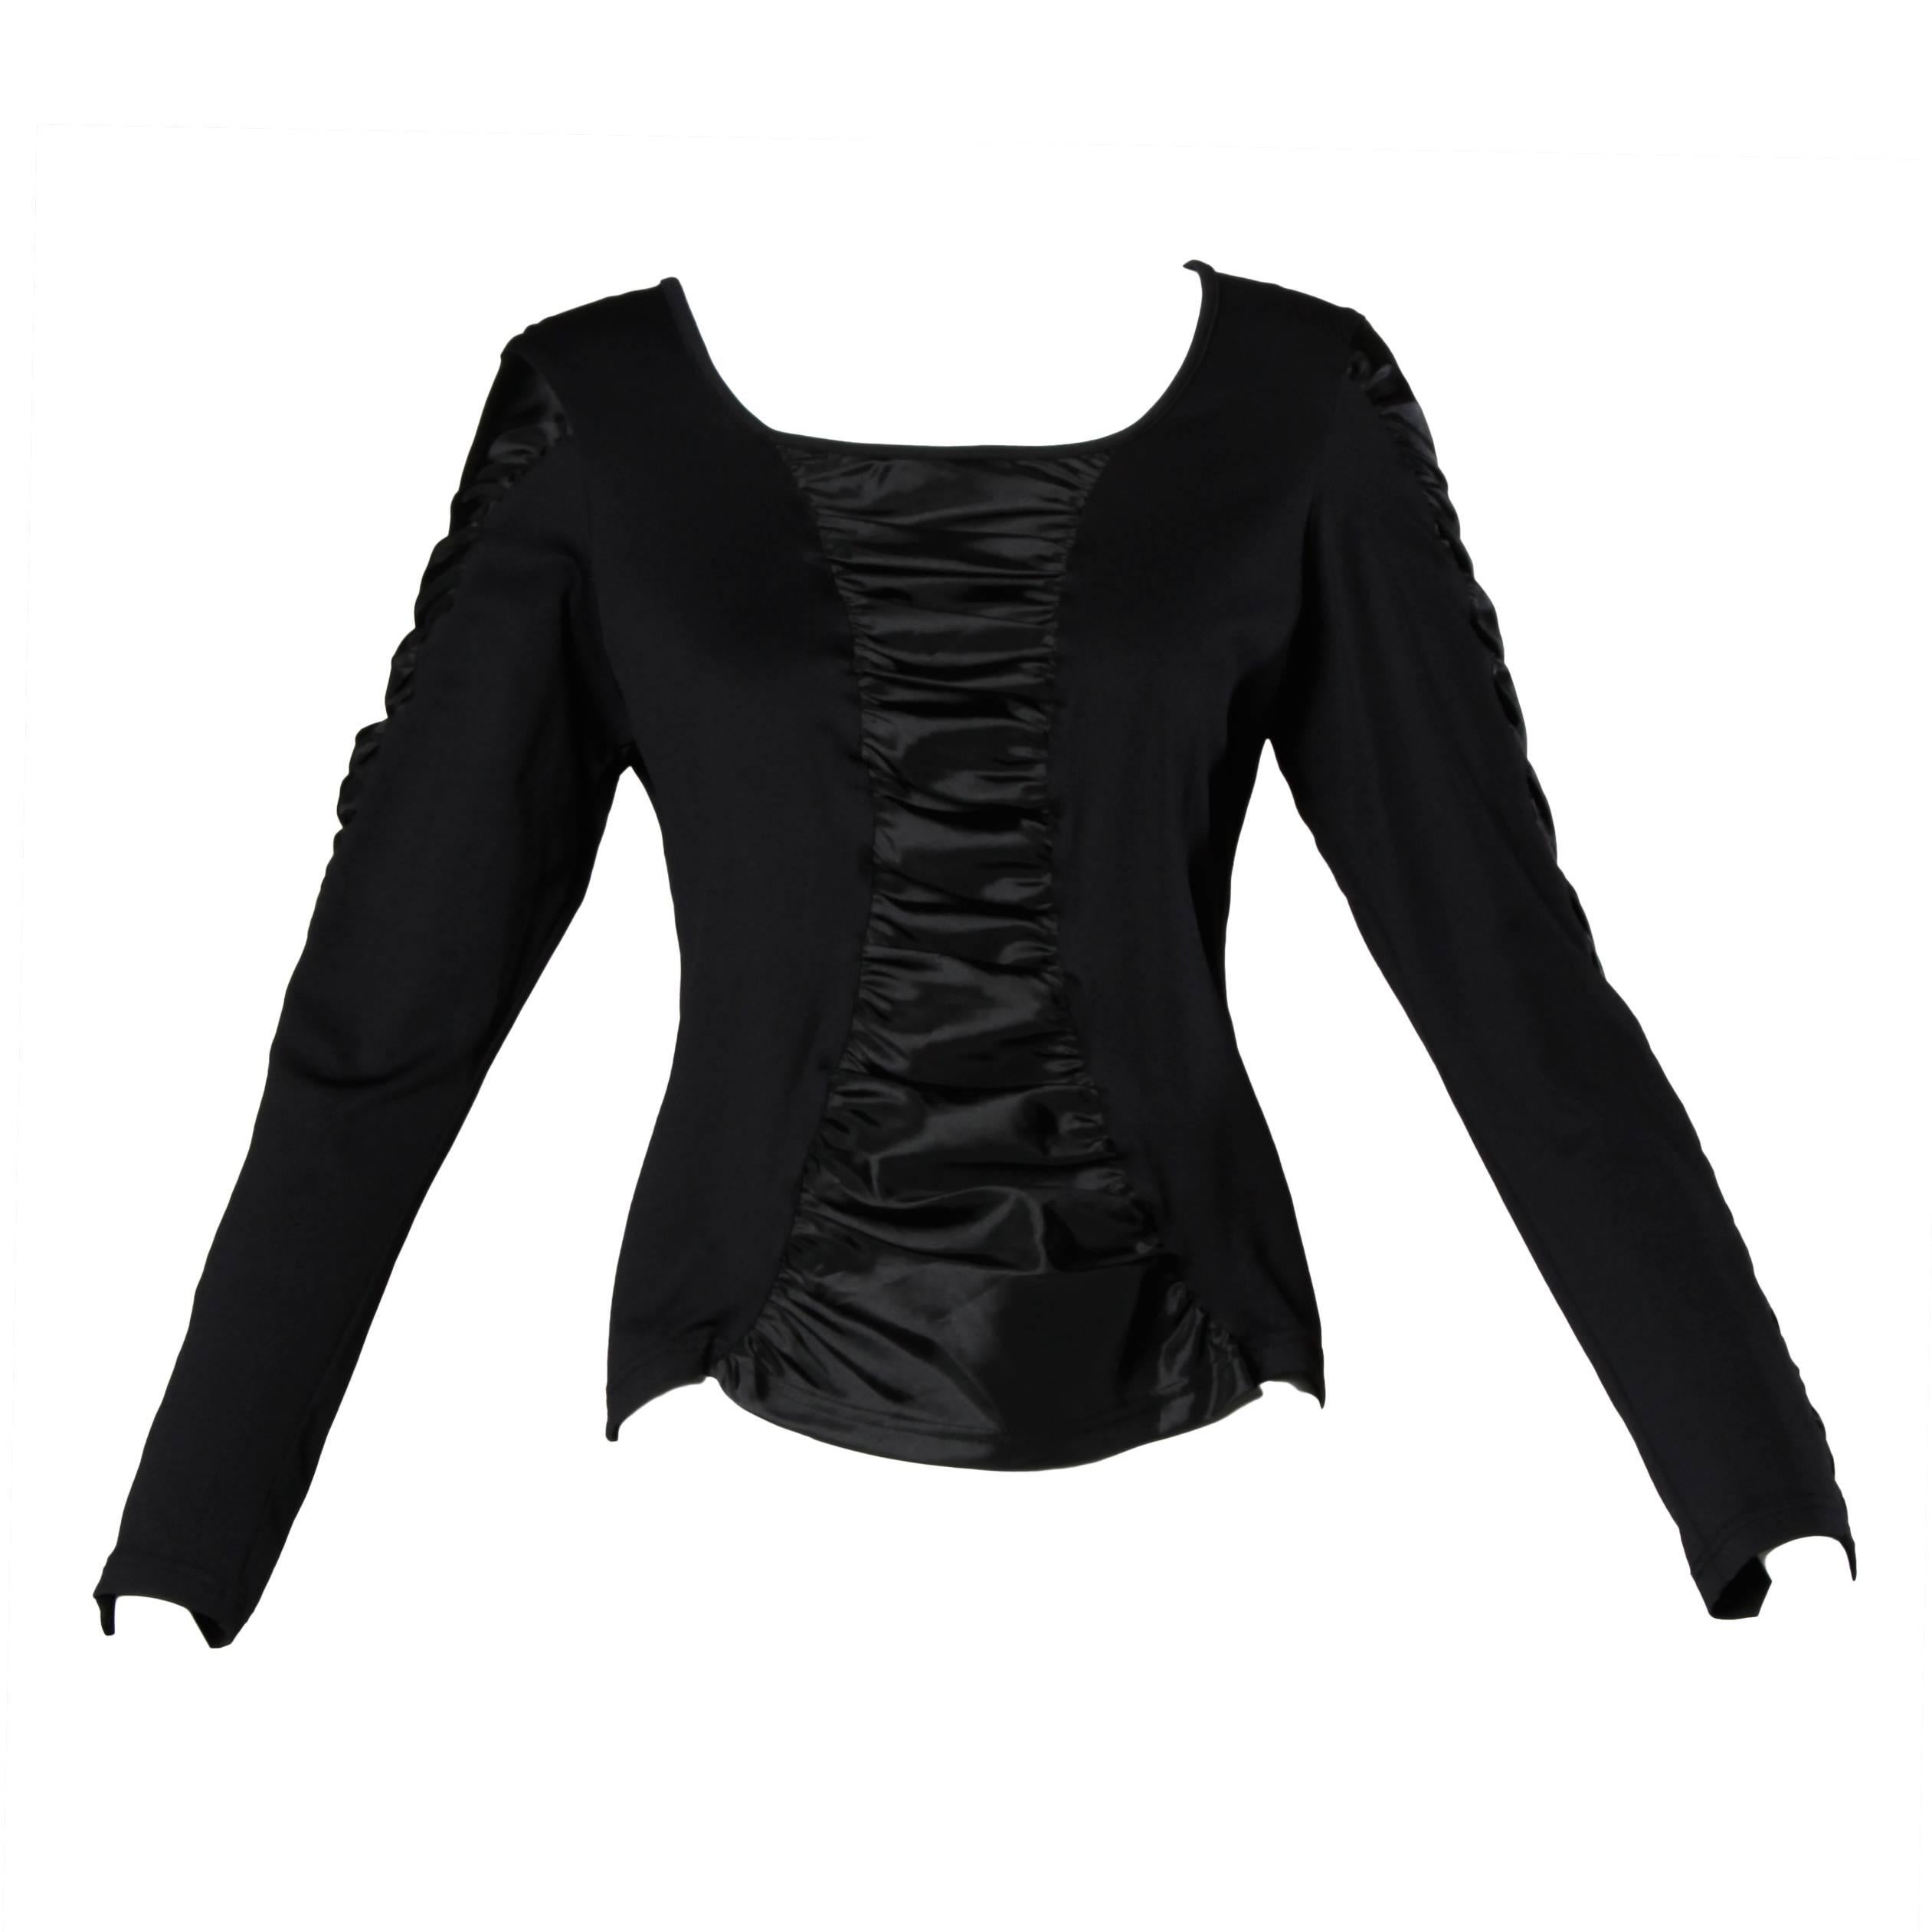 Anne Fontaine French-Made Ruched Long Sleeve Top or Shirt